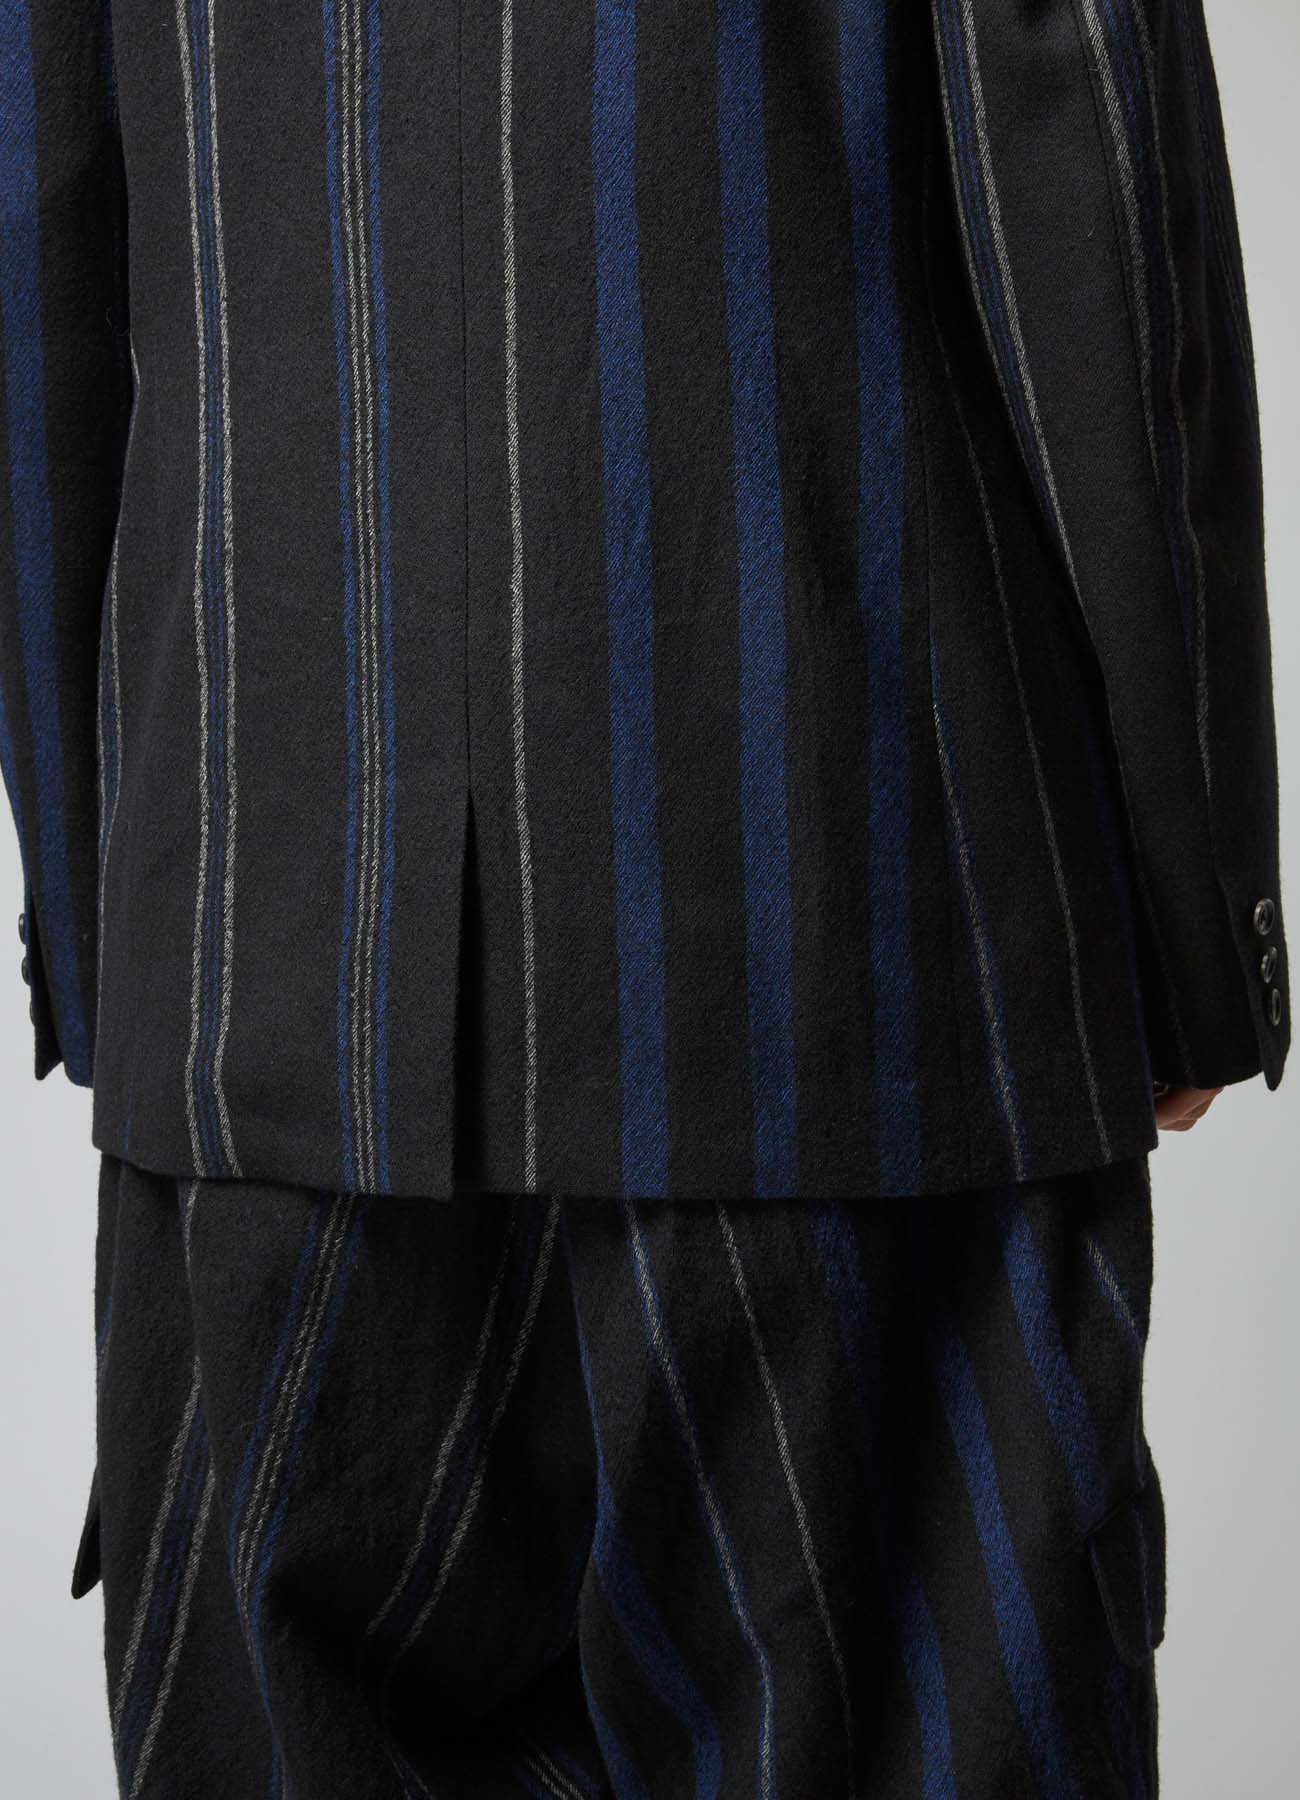 STRIPED PATTERN JACKET WITH COLOR SCHEME